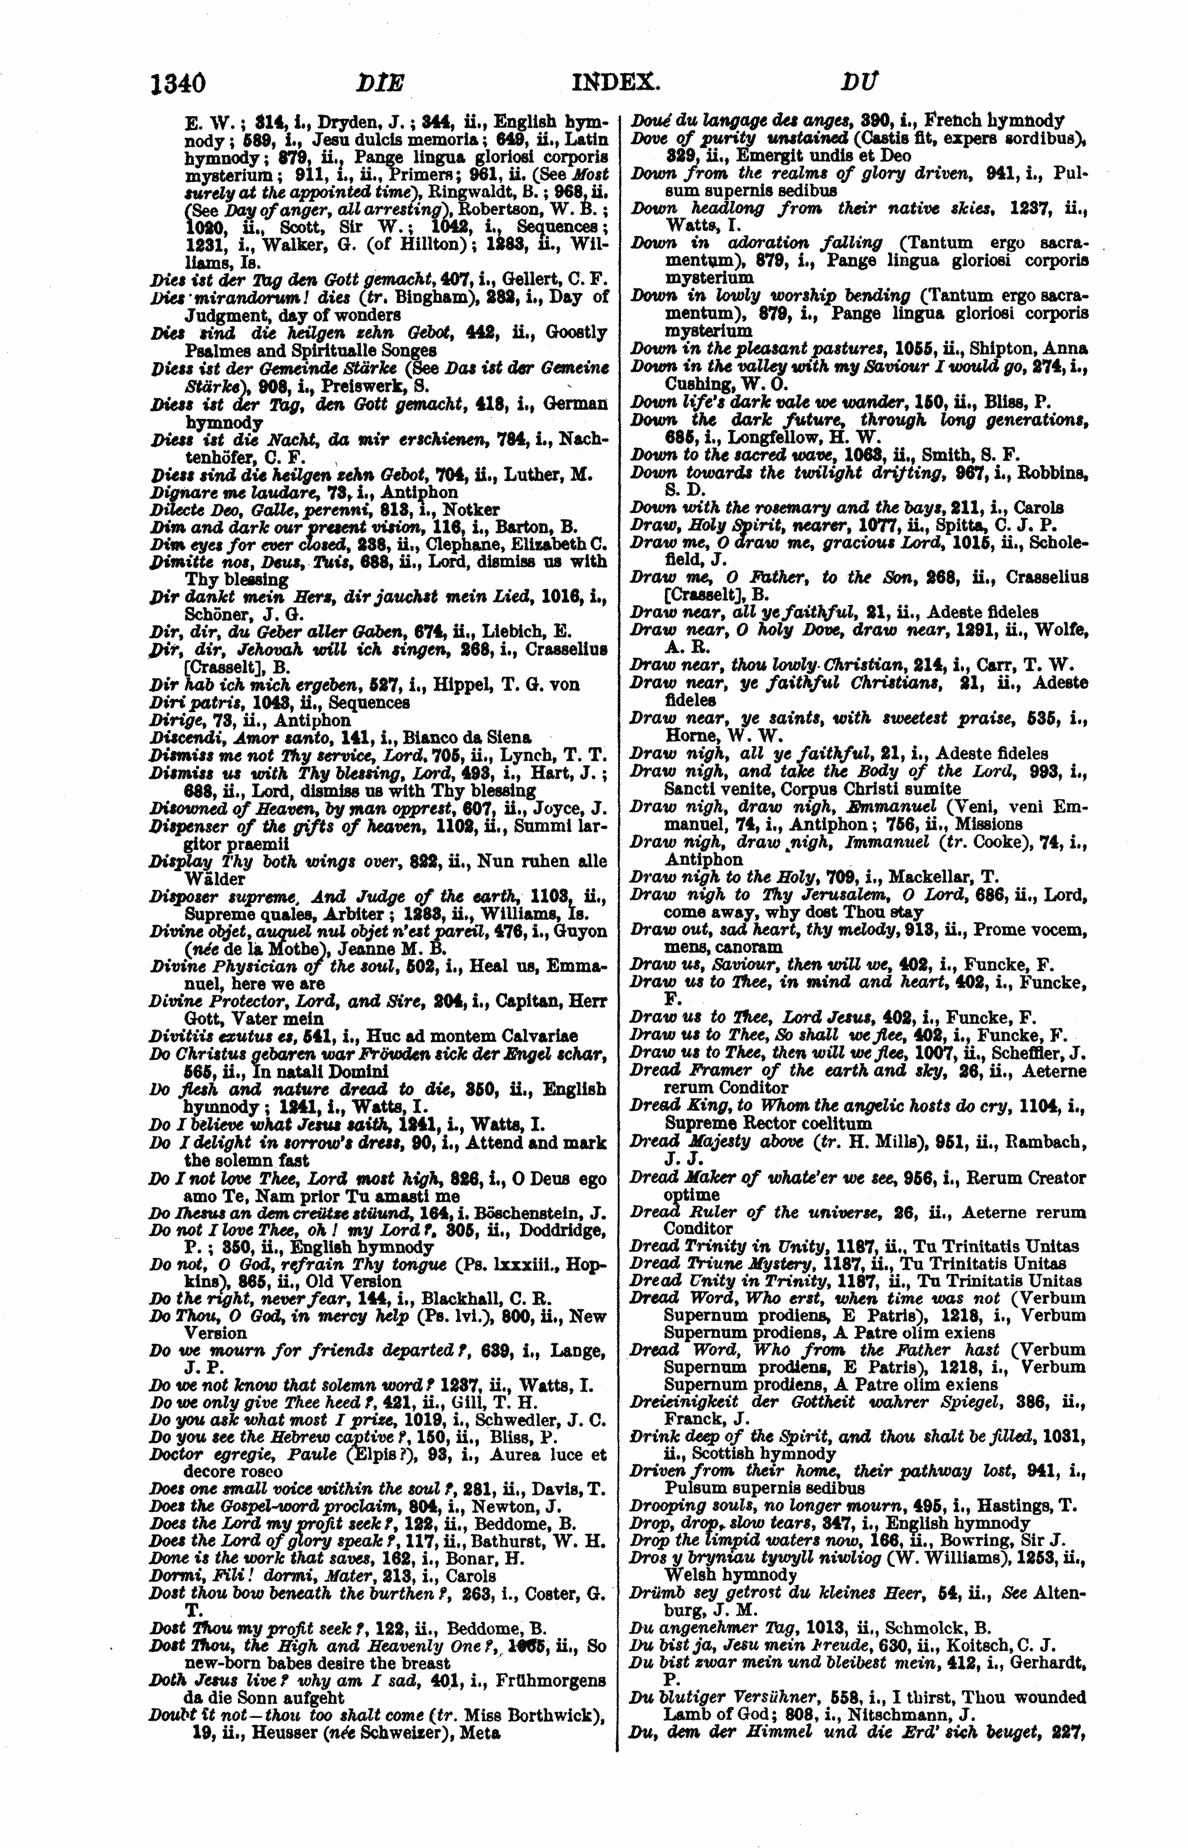 Image of page 1340